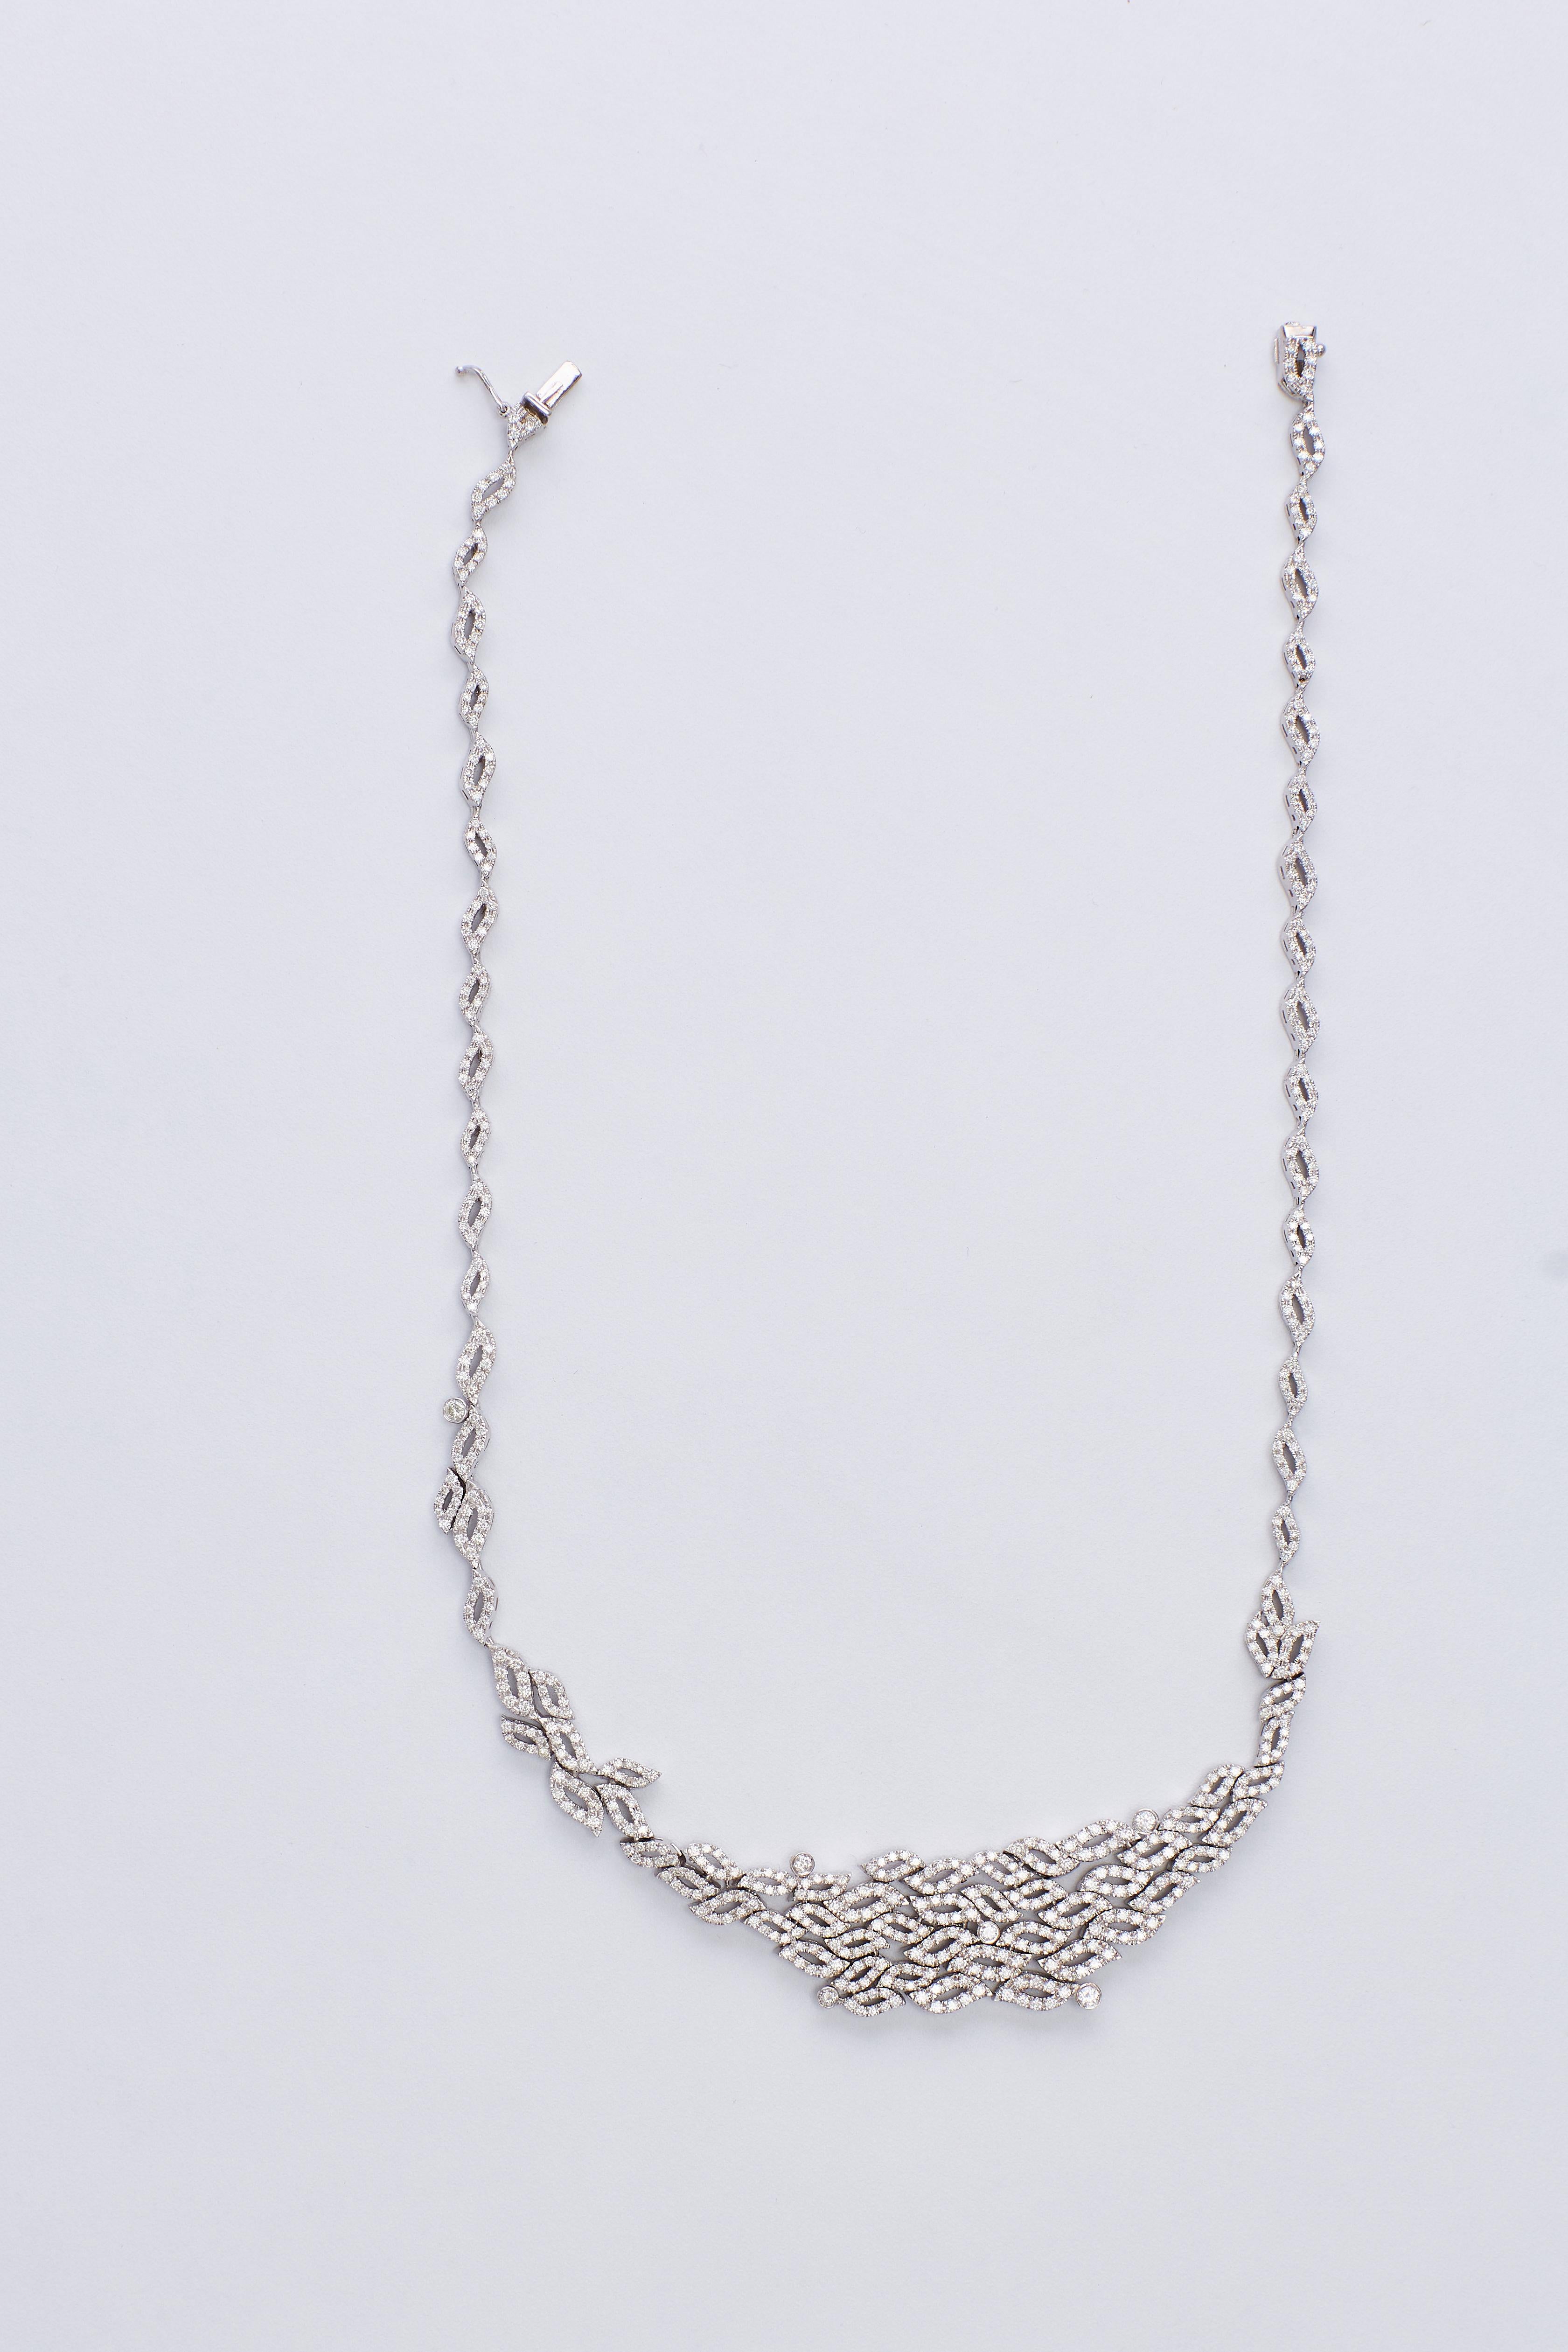 18 Karat White Gold Diamonds Necklace (Collier)

This necklace is an amazing design of white gold and round cut diamonds. The collier has a look as if there are diamond flames everywhere. 
7.25 carat diamonds F VS1.
Total Weight: 118 grams.